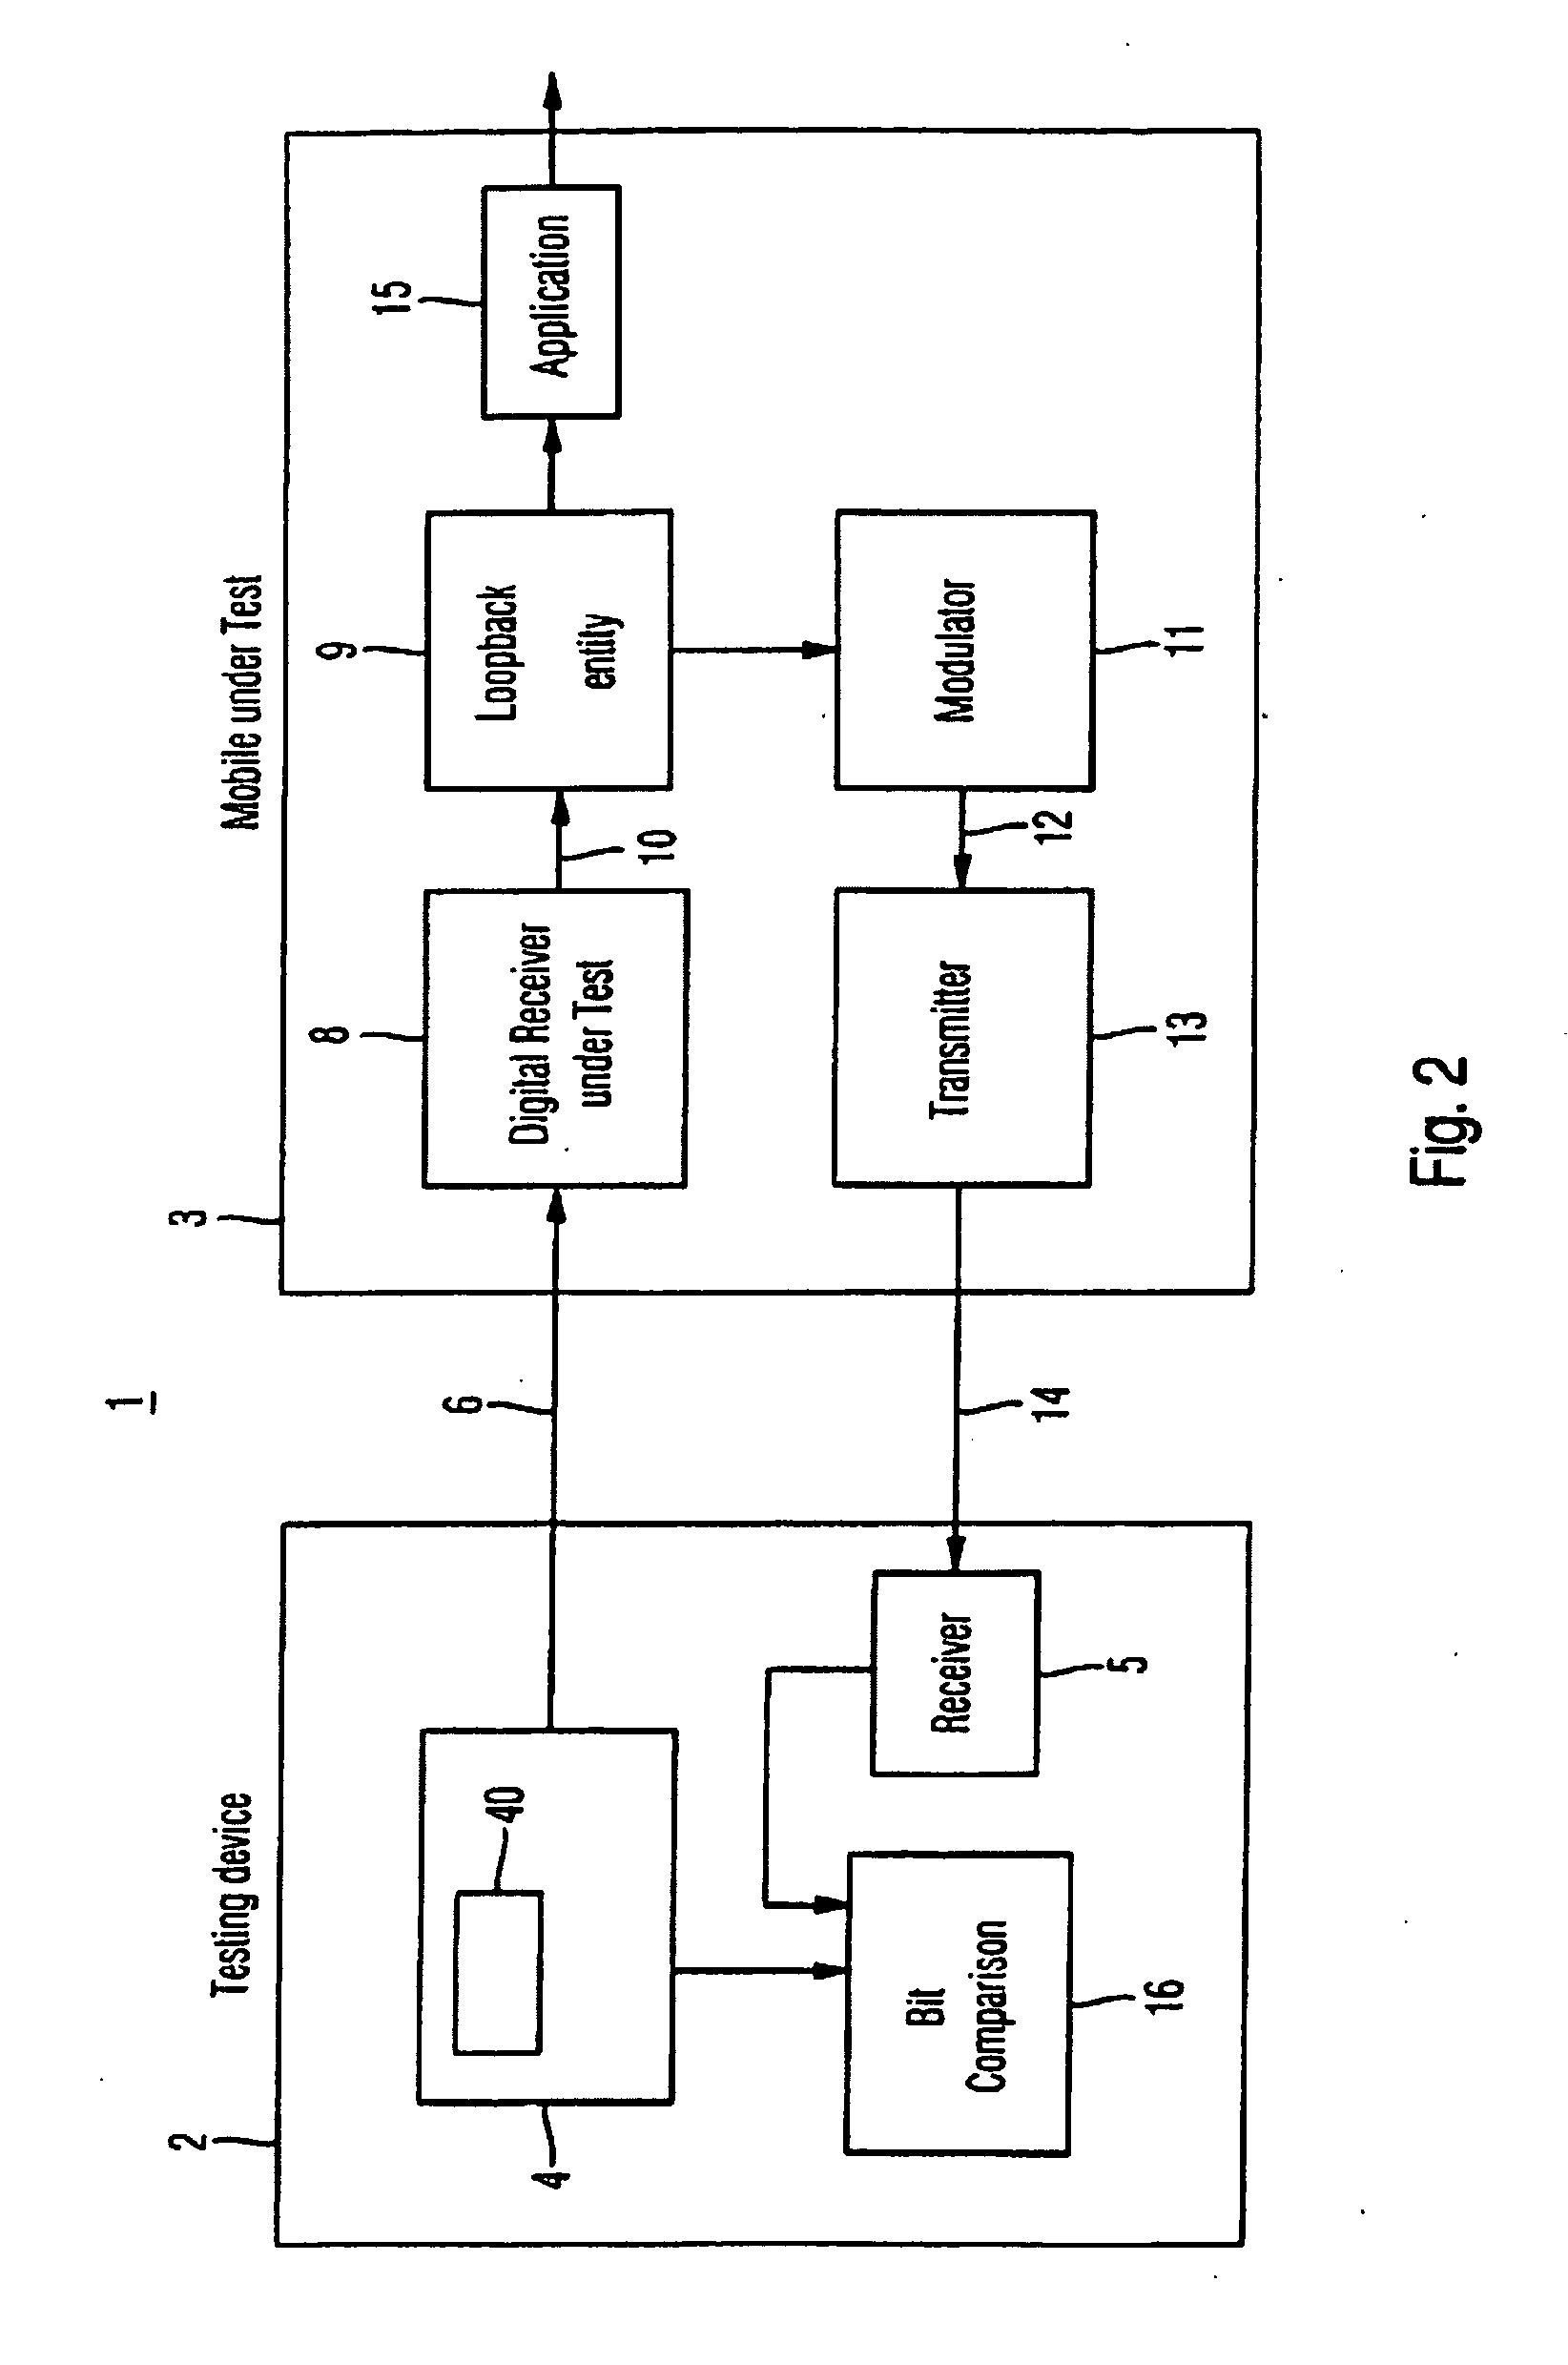 System, mobile communication unit and method for testing a receiver performance